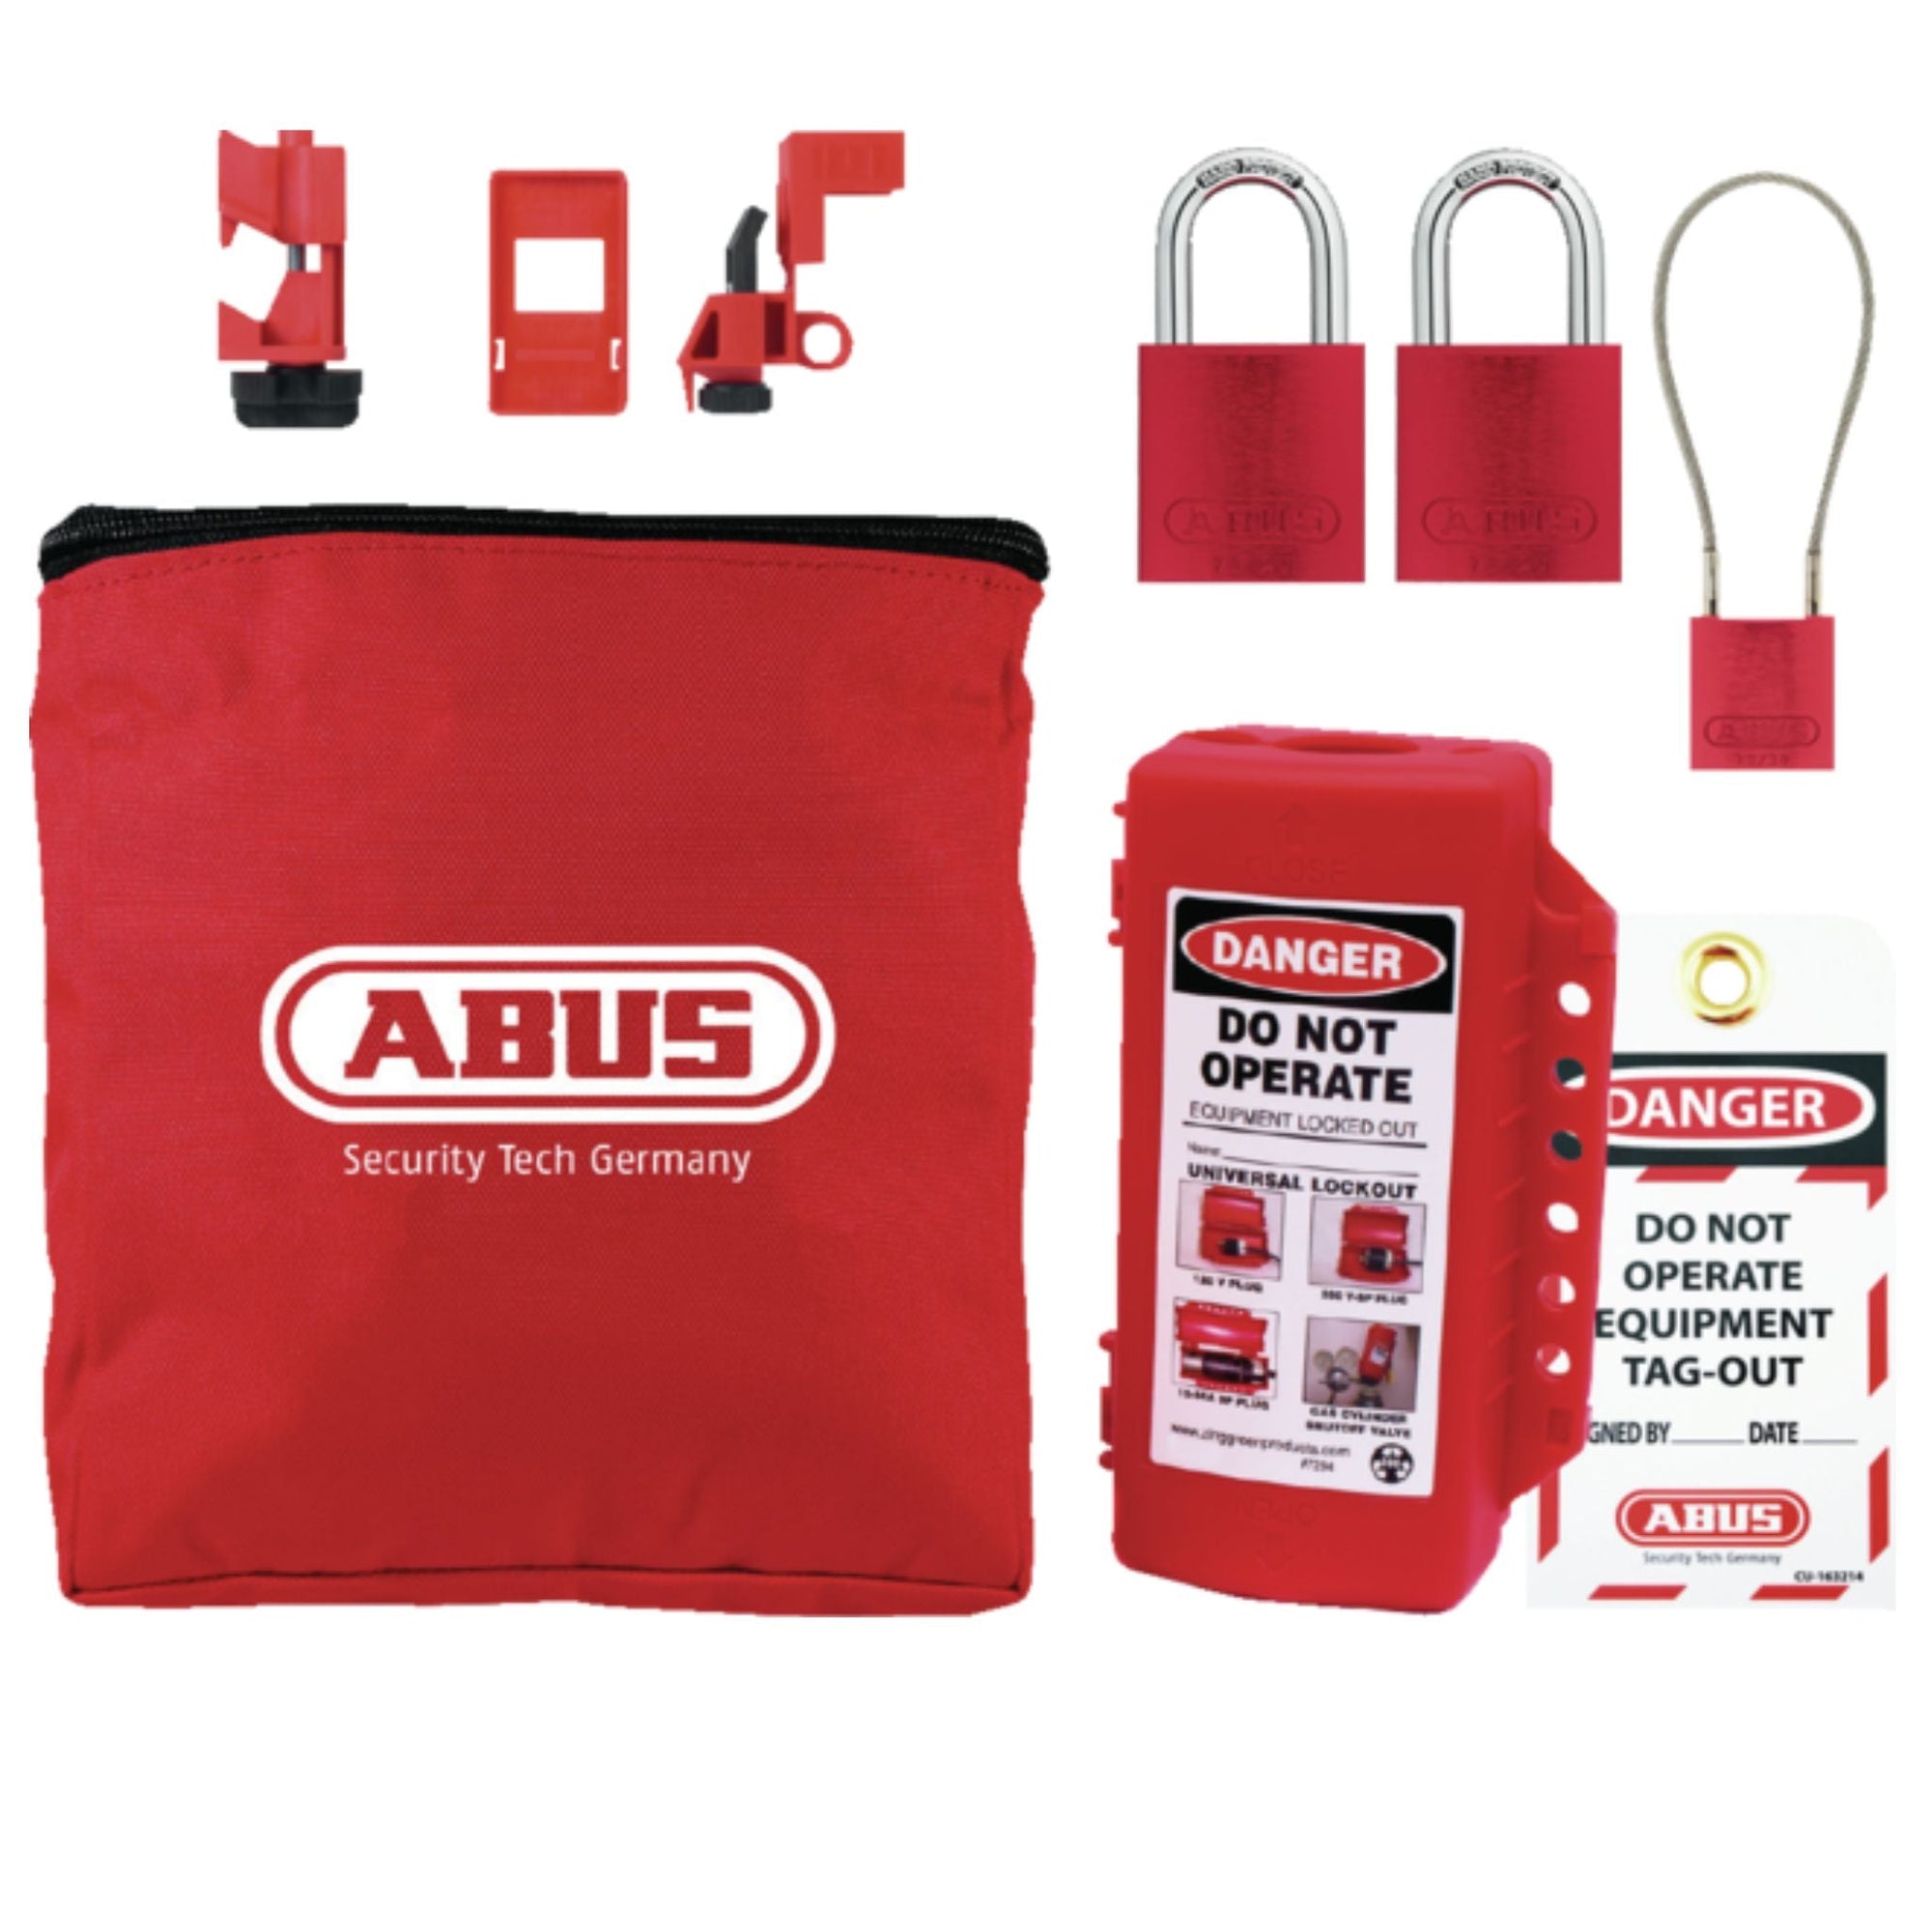 The Abus K800 (18051) Construction Lockout Tagout Kit Stores and Organizes Lockout Devices In One Location - The Lock Source